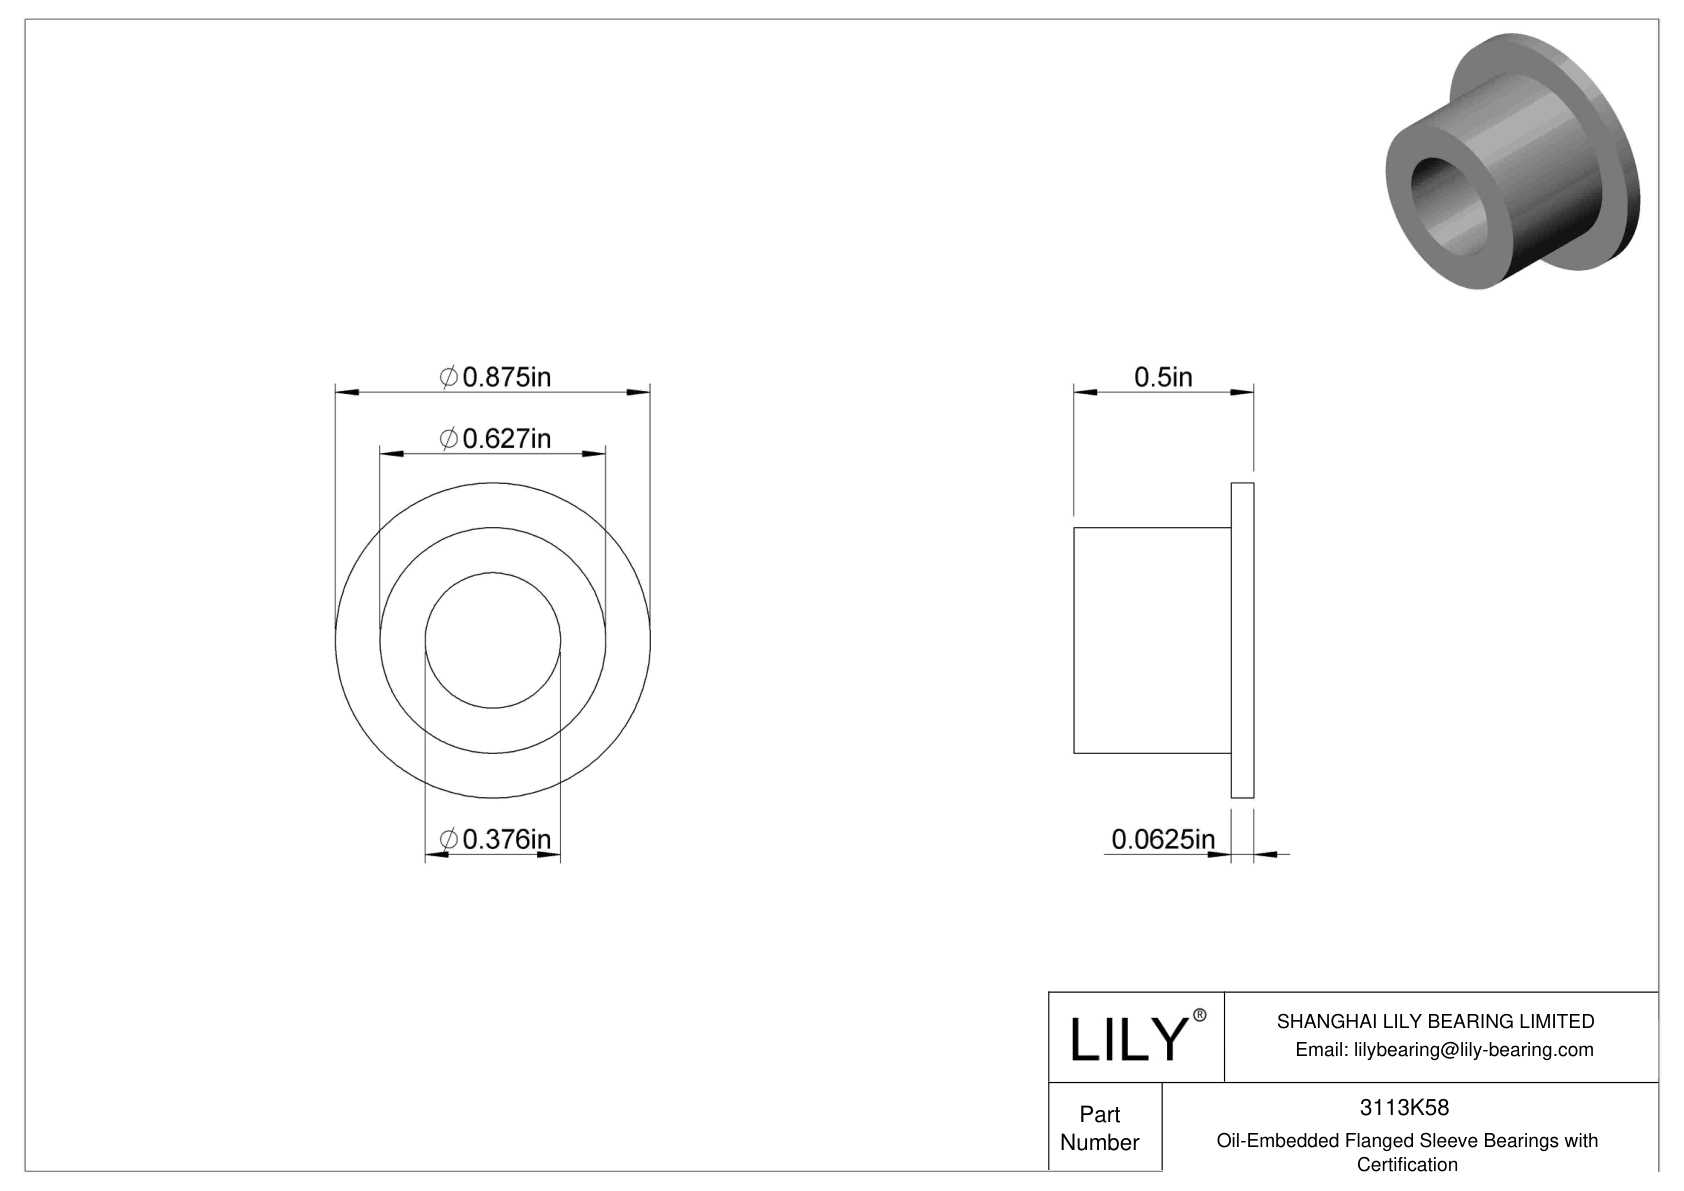 DBBDKFI Oil-Embedded Flanged Sleeve Bearings with Certification cad drawing